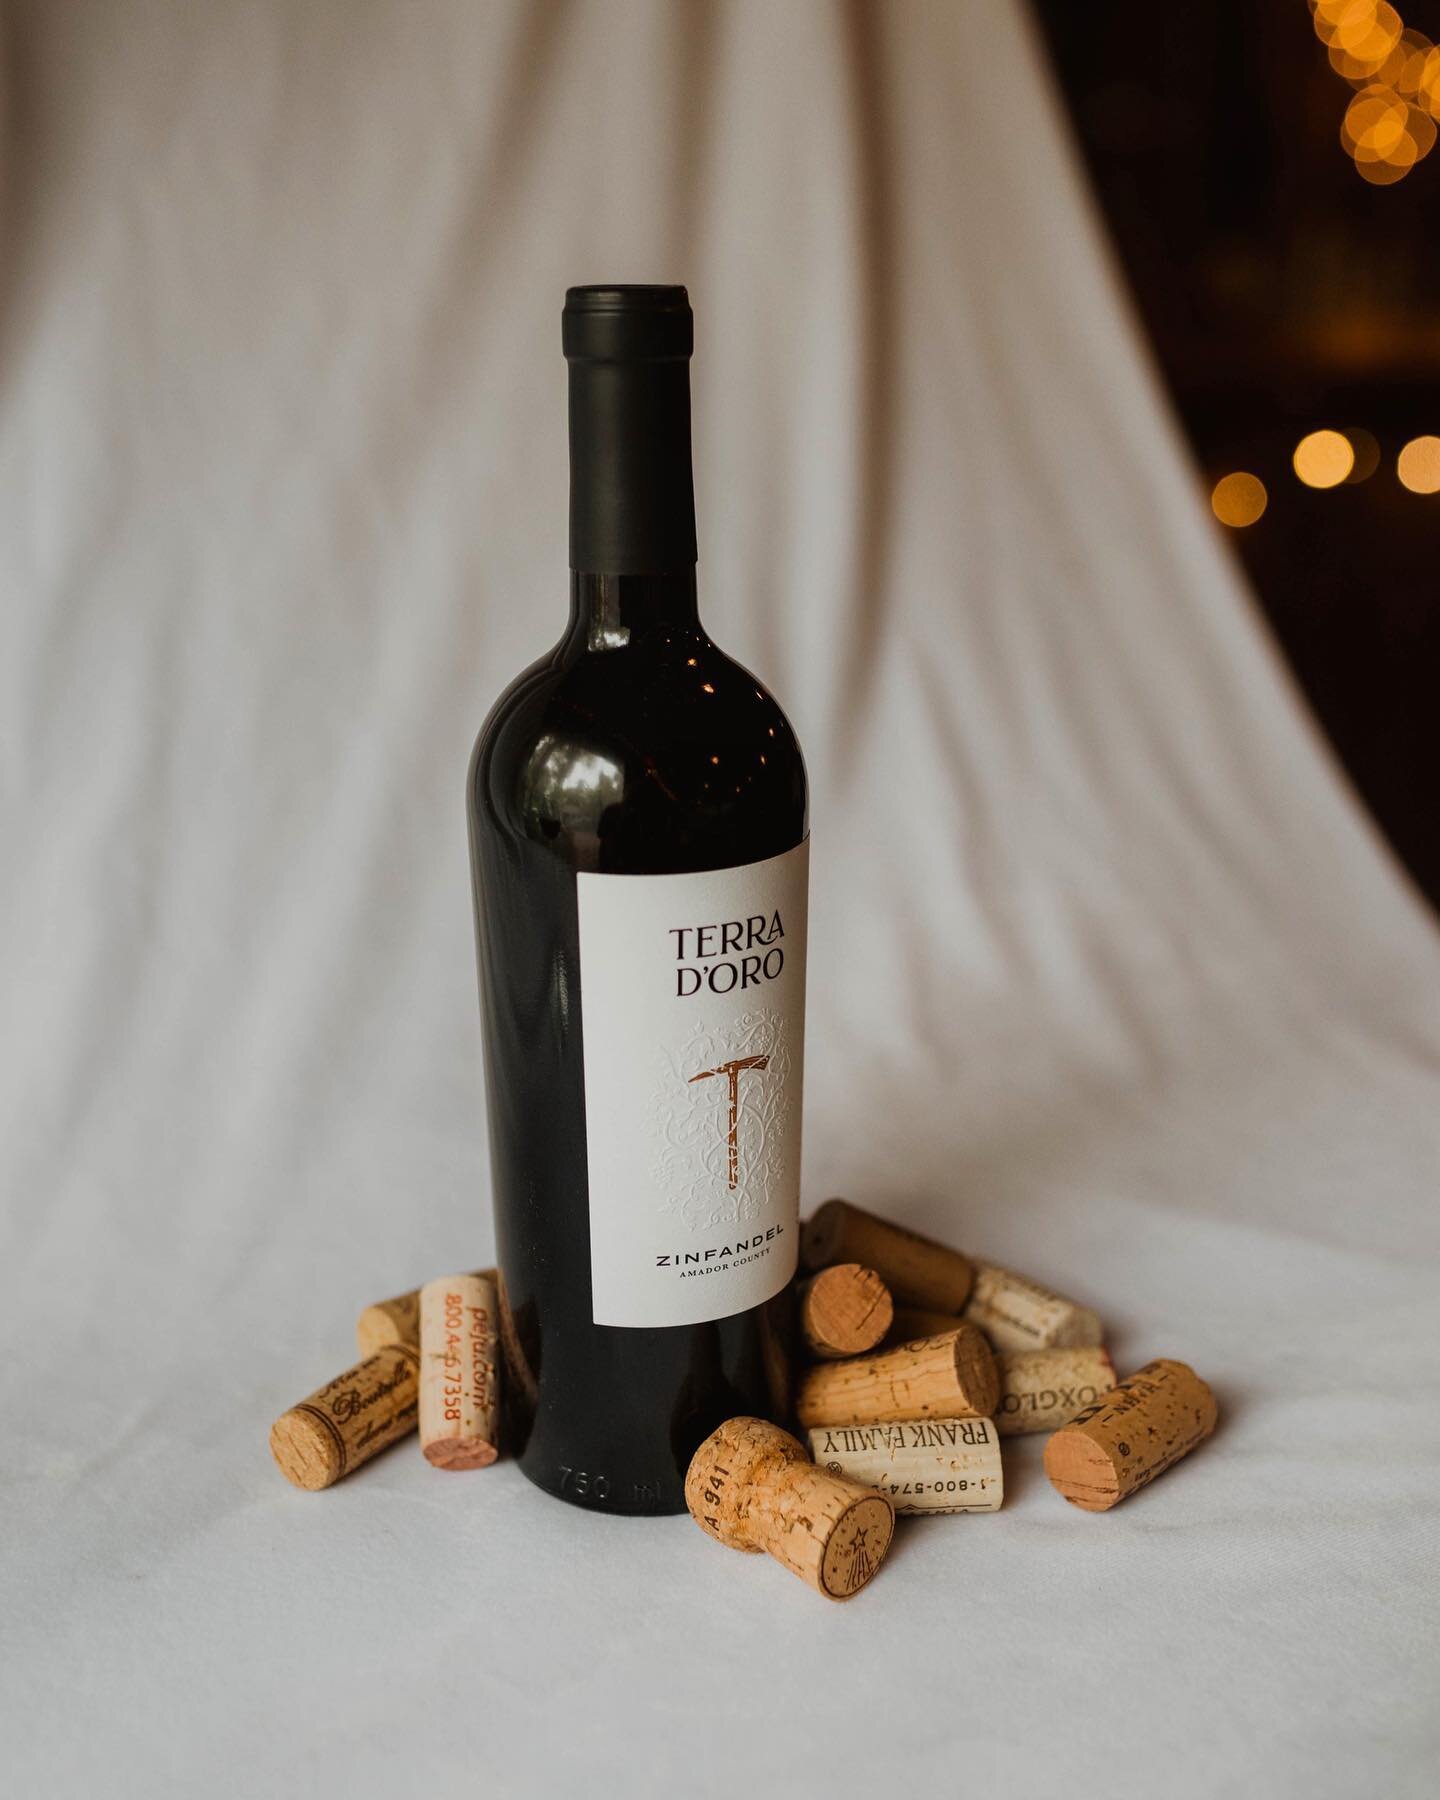 Happy #winewednesday ✨ This weeks feature is the Terra d'Oro Amador Zinfandel! ⁣
.⁣
.⁣⁣
⁣
&ldquo;An abundance of plums and flavors of dense, juicy blackberries excites the senses with a round mouthfeel of well-integrated tannins on the finish. This w